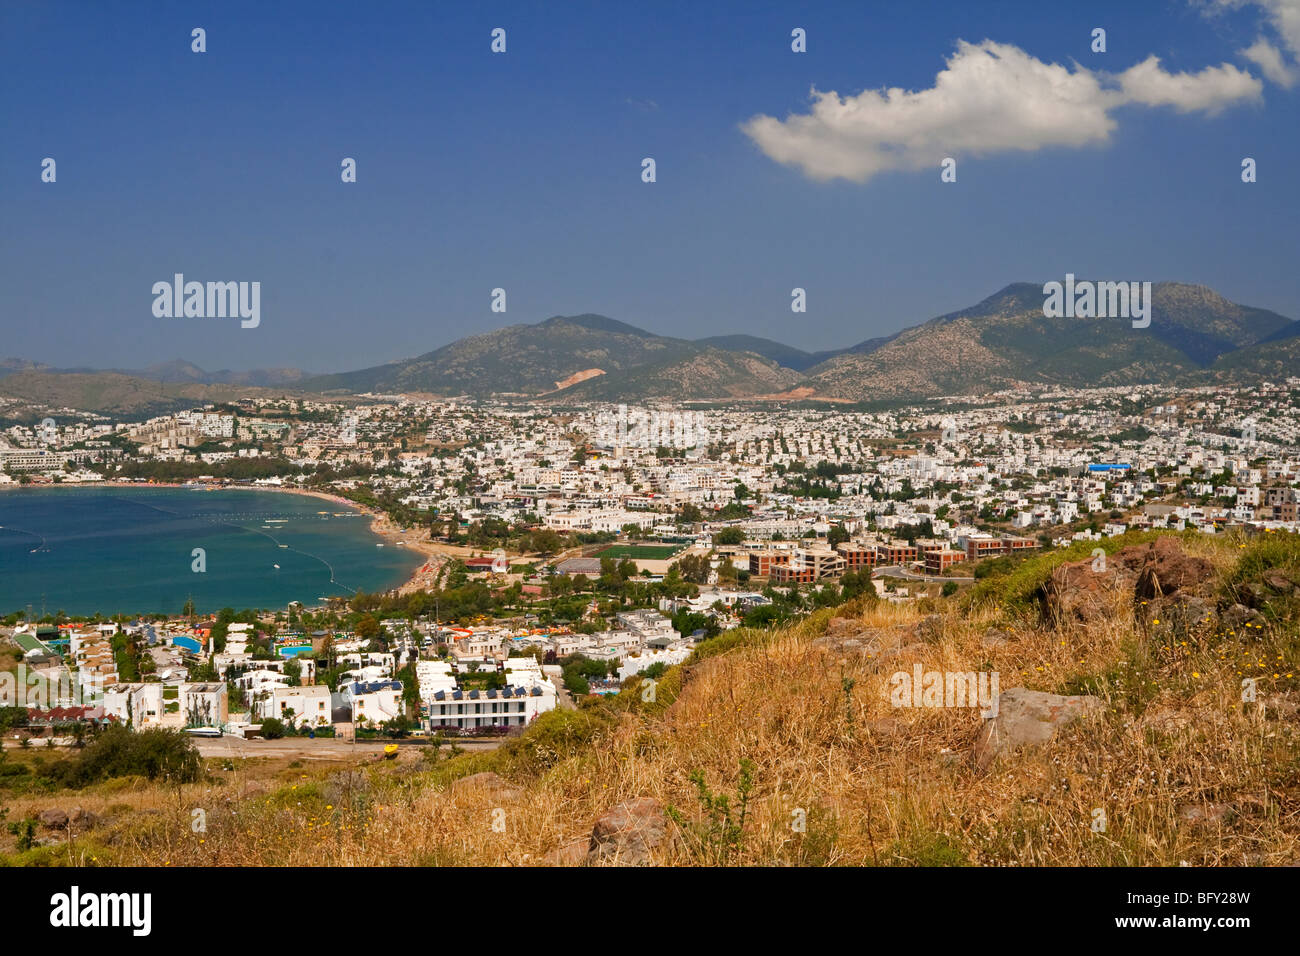 View over the tourist resort of Gumbet near Bodrum in western Turkey showing holiday villas and apartments with mountains behind Stock Photo